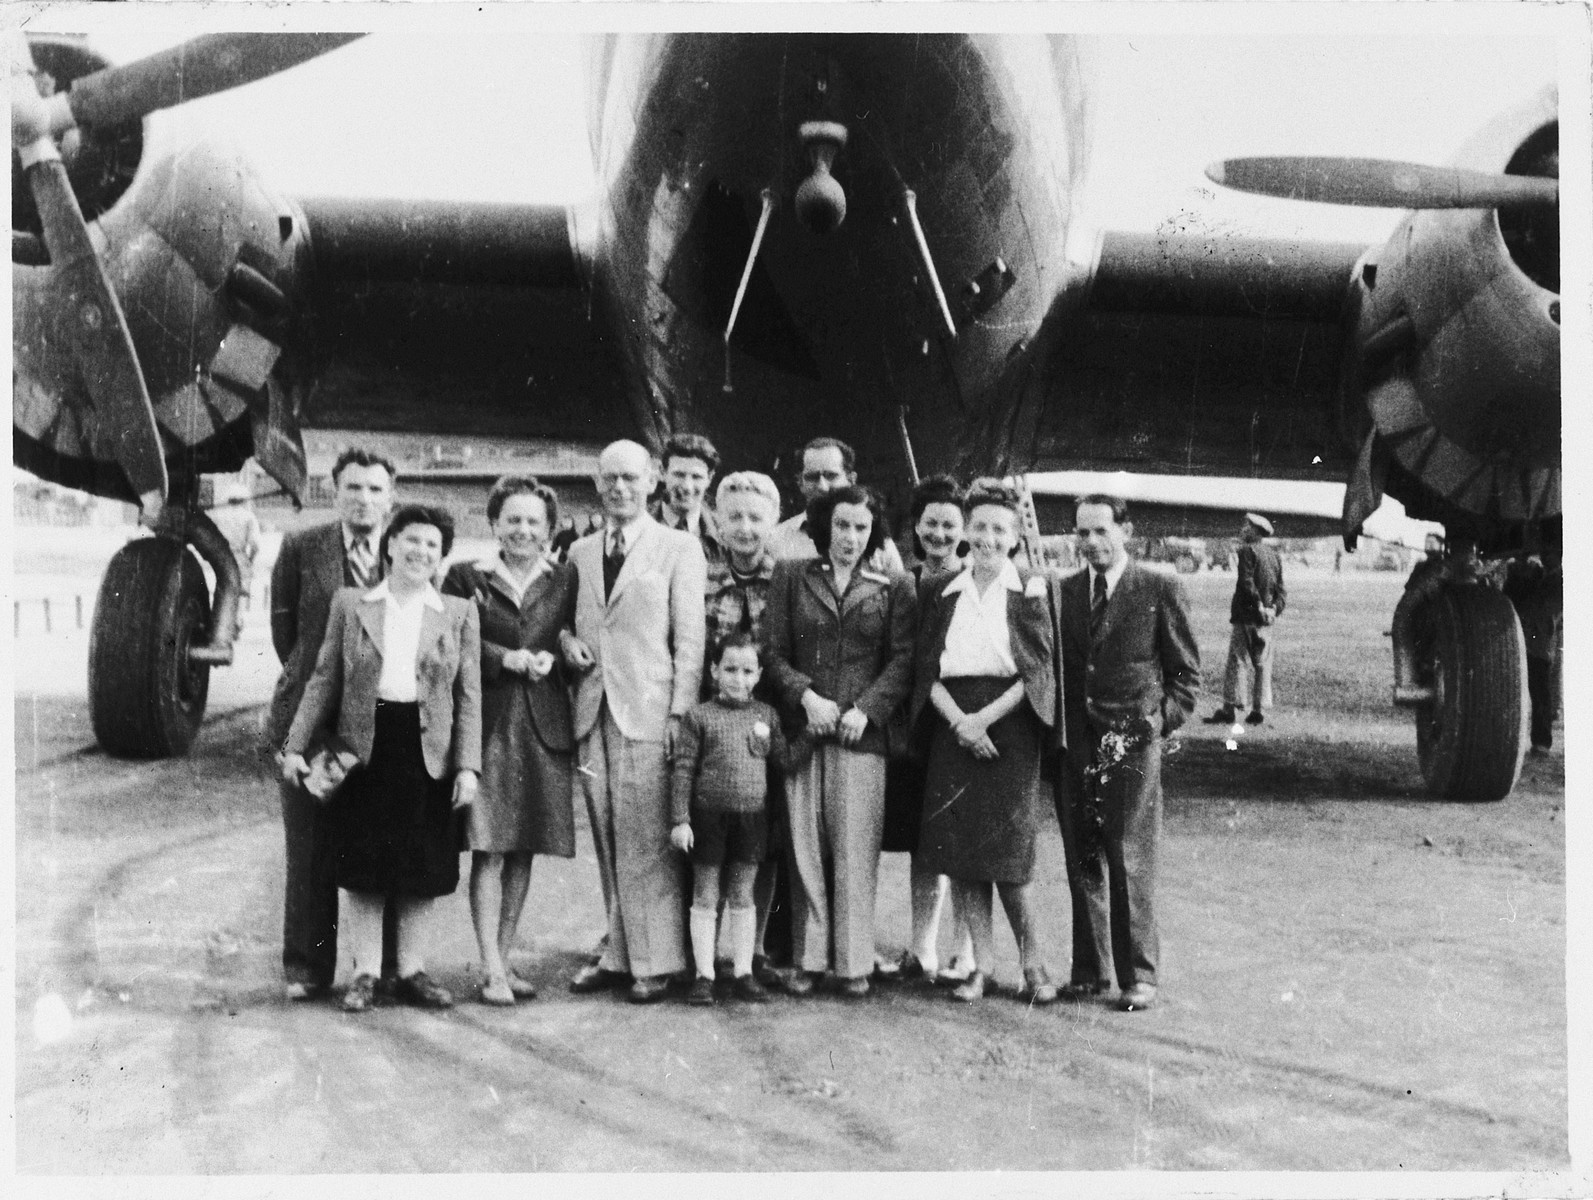 Group portrait of Jewish refugees at the Shanghai airport.

Among those pictured are: Rudolph and Ana Brosan (at the far left), Alfred Brosan (center, behind the man in the light suit), and Richard Brosan (first on the right).